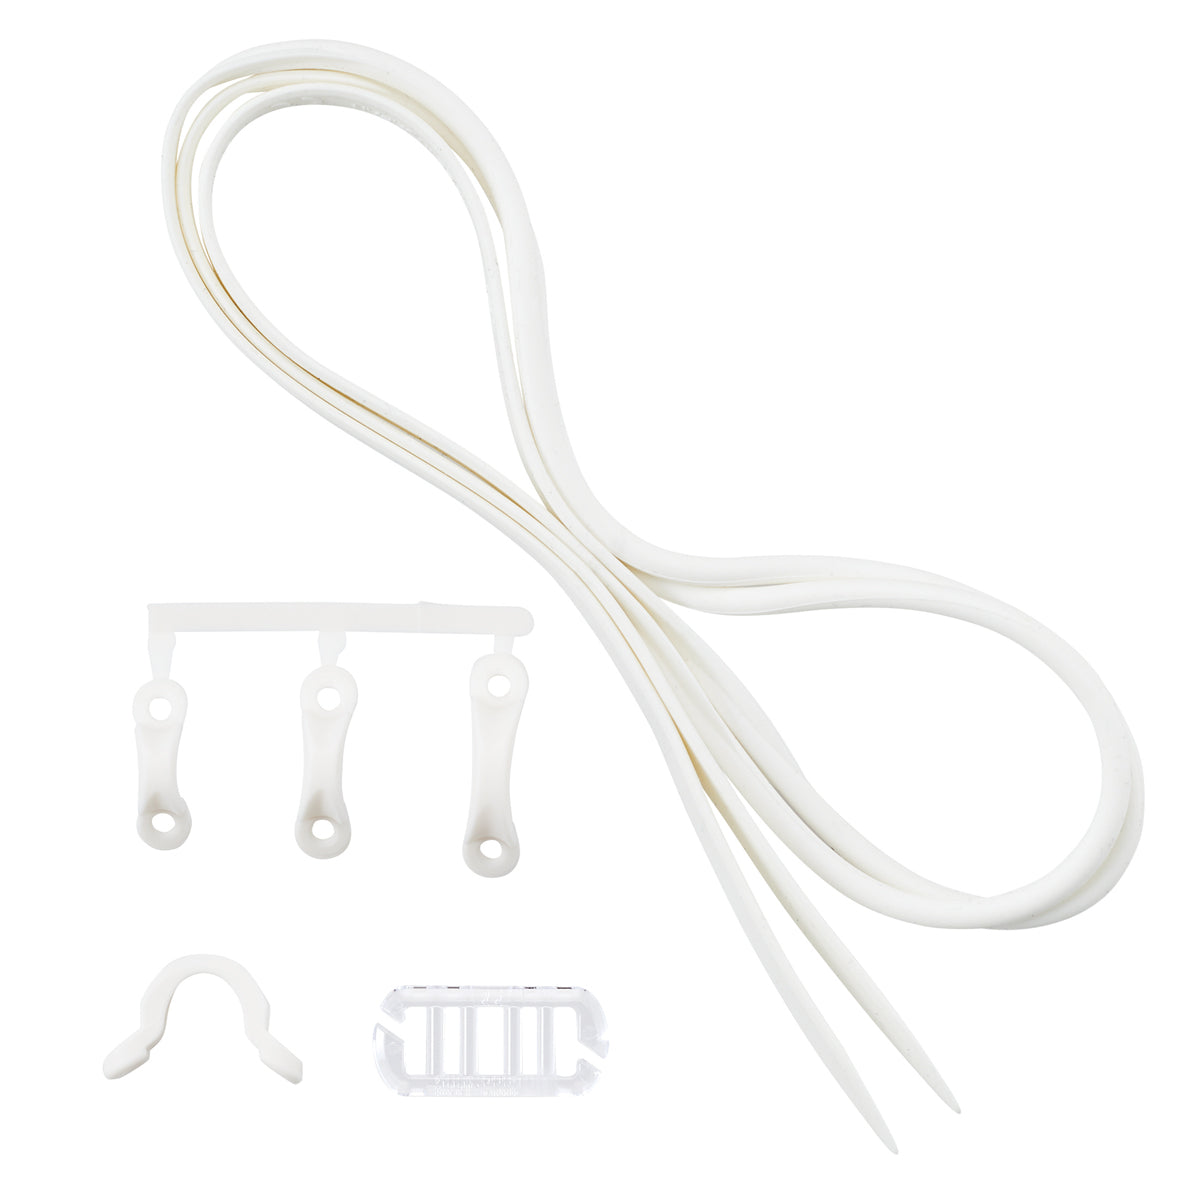 Spare Goggle Parts Kit White